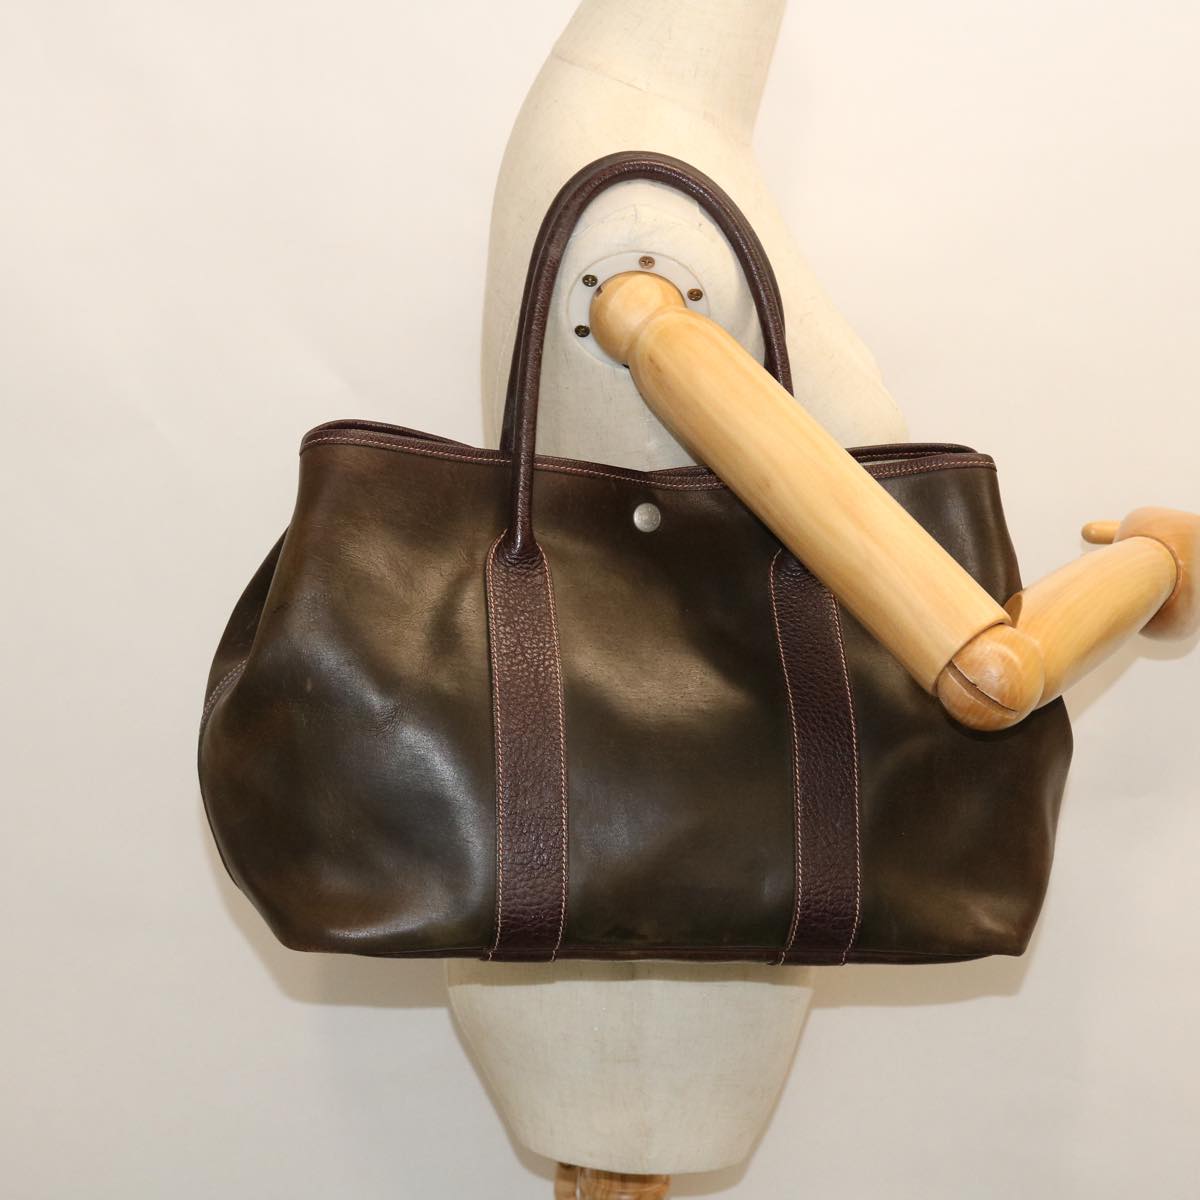 HERMES Garden Party PM Tote Bag Leather Brown Auth bs7423